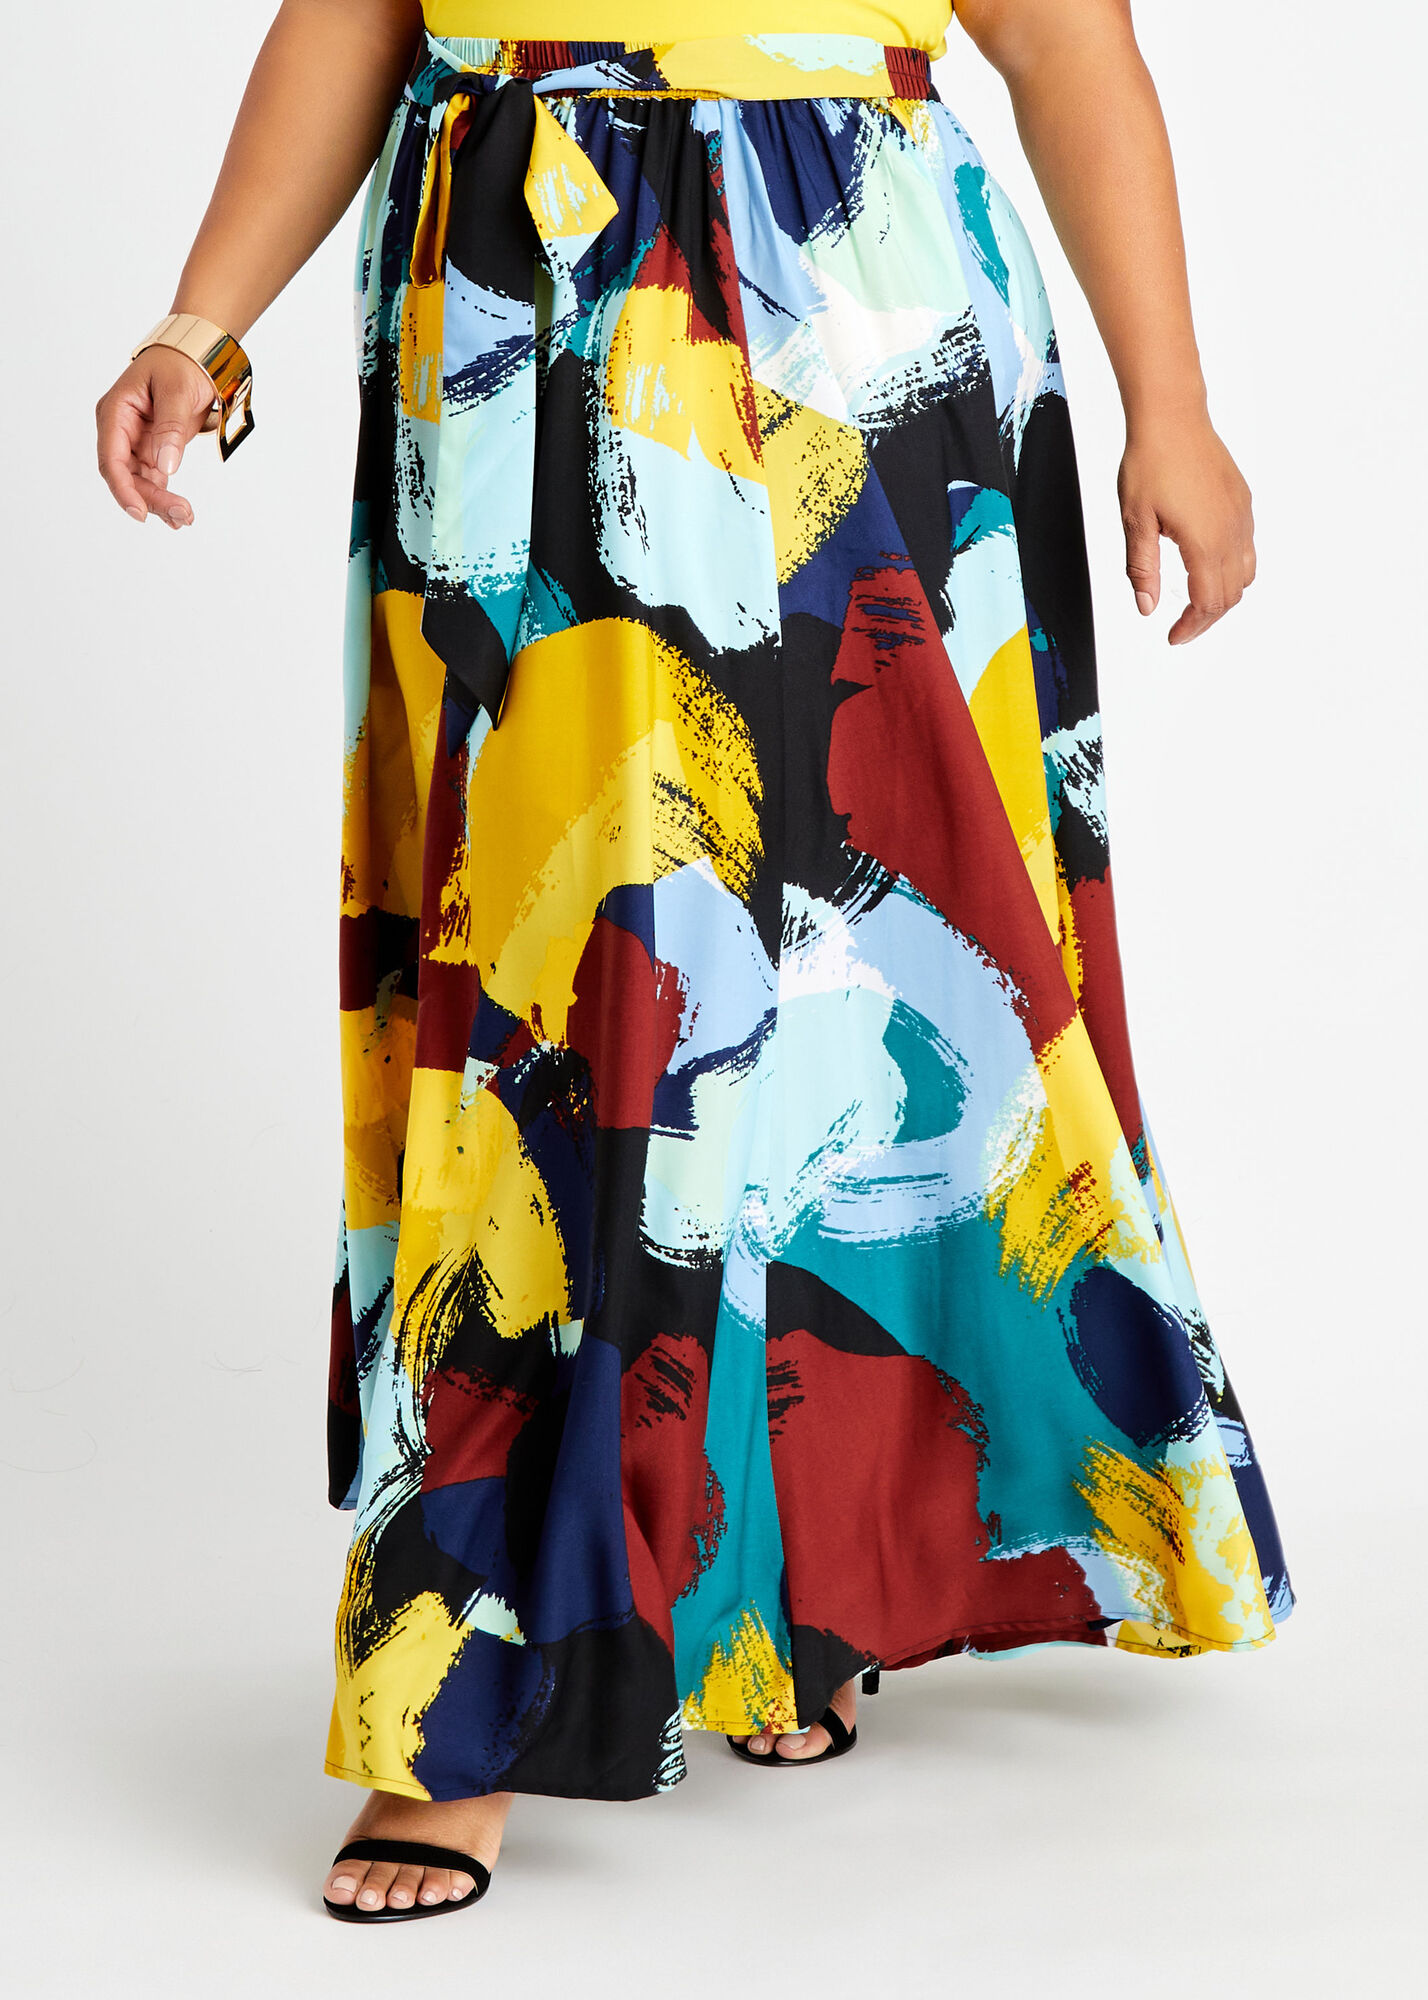 Plus Size Maxi Skirts Plus Size Printed Skirts Plus Size Belted Skirts